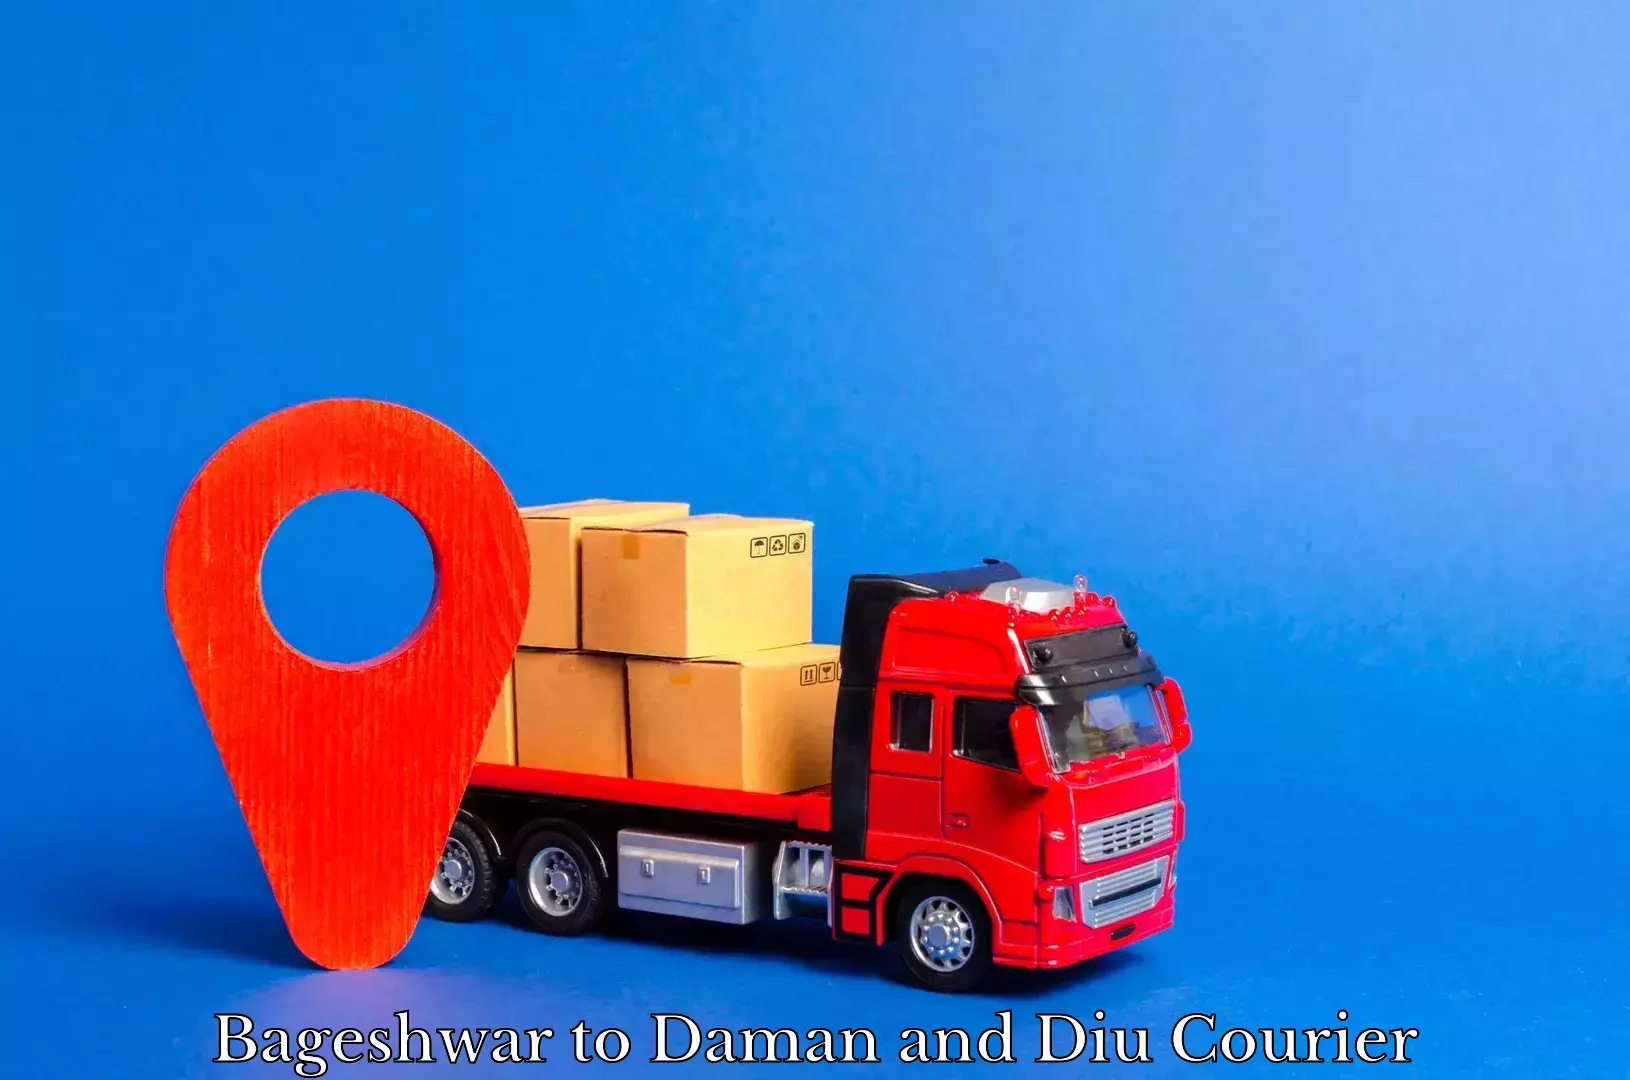 State-of-the-art courier technology Bageshwar to Daman and Diu